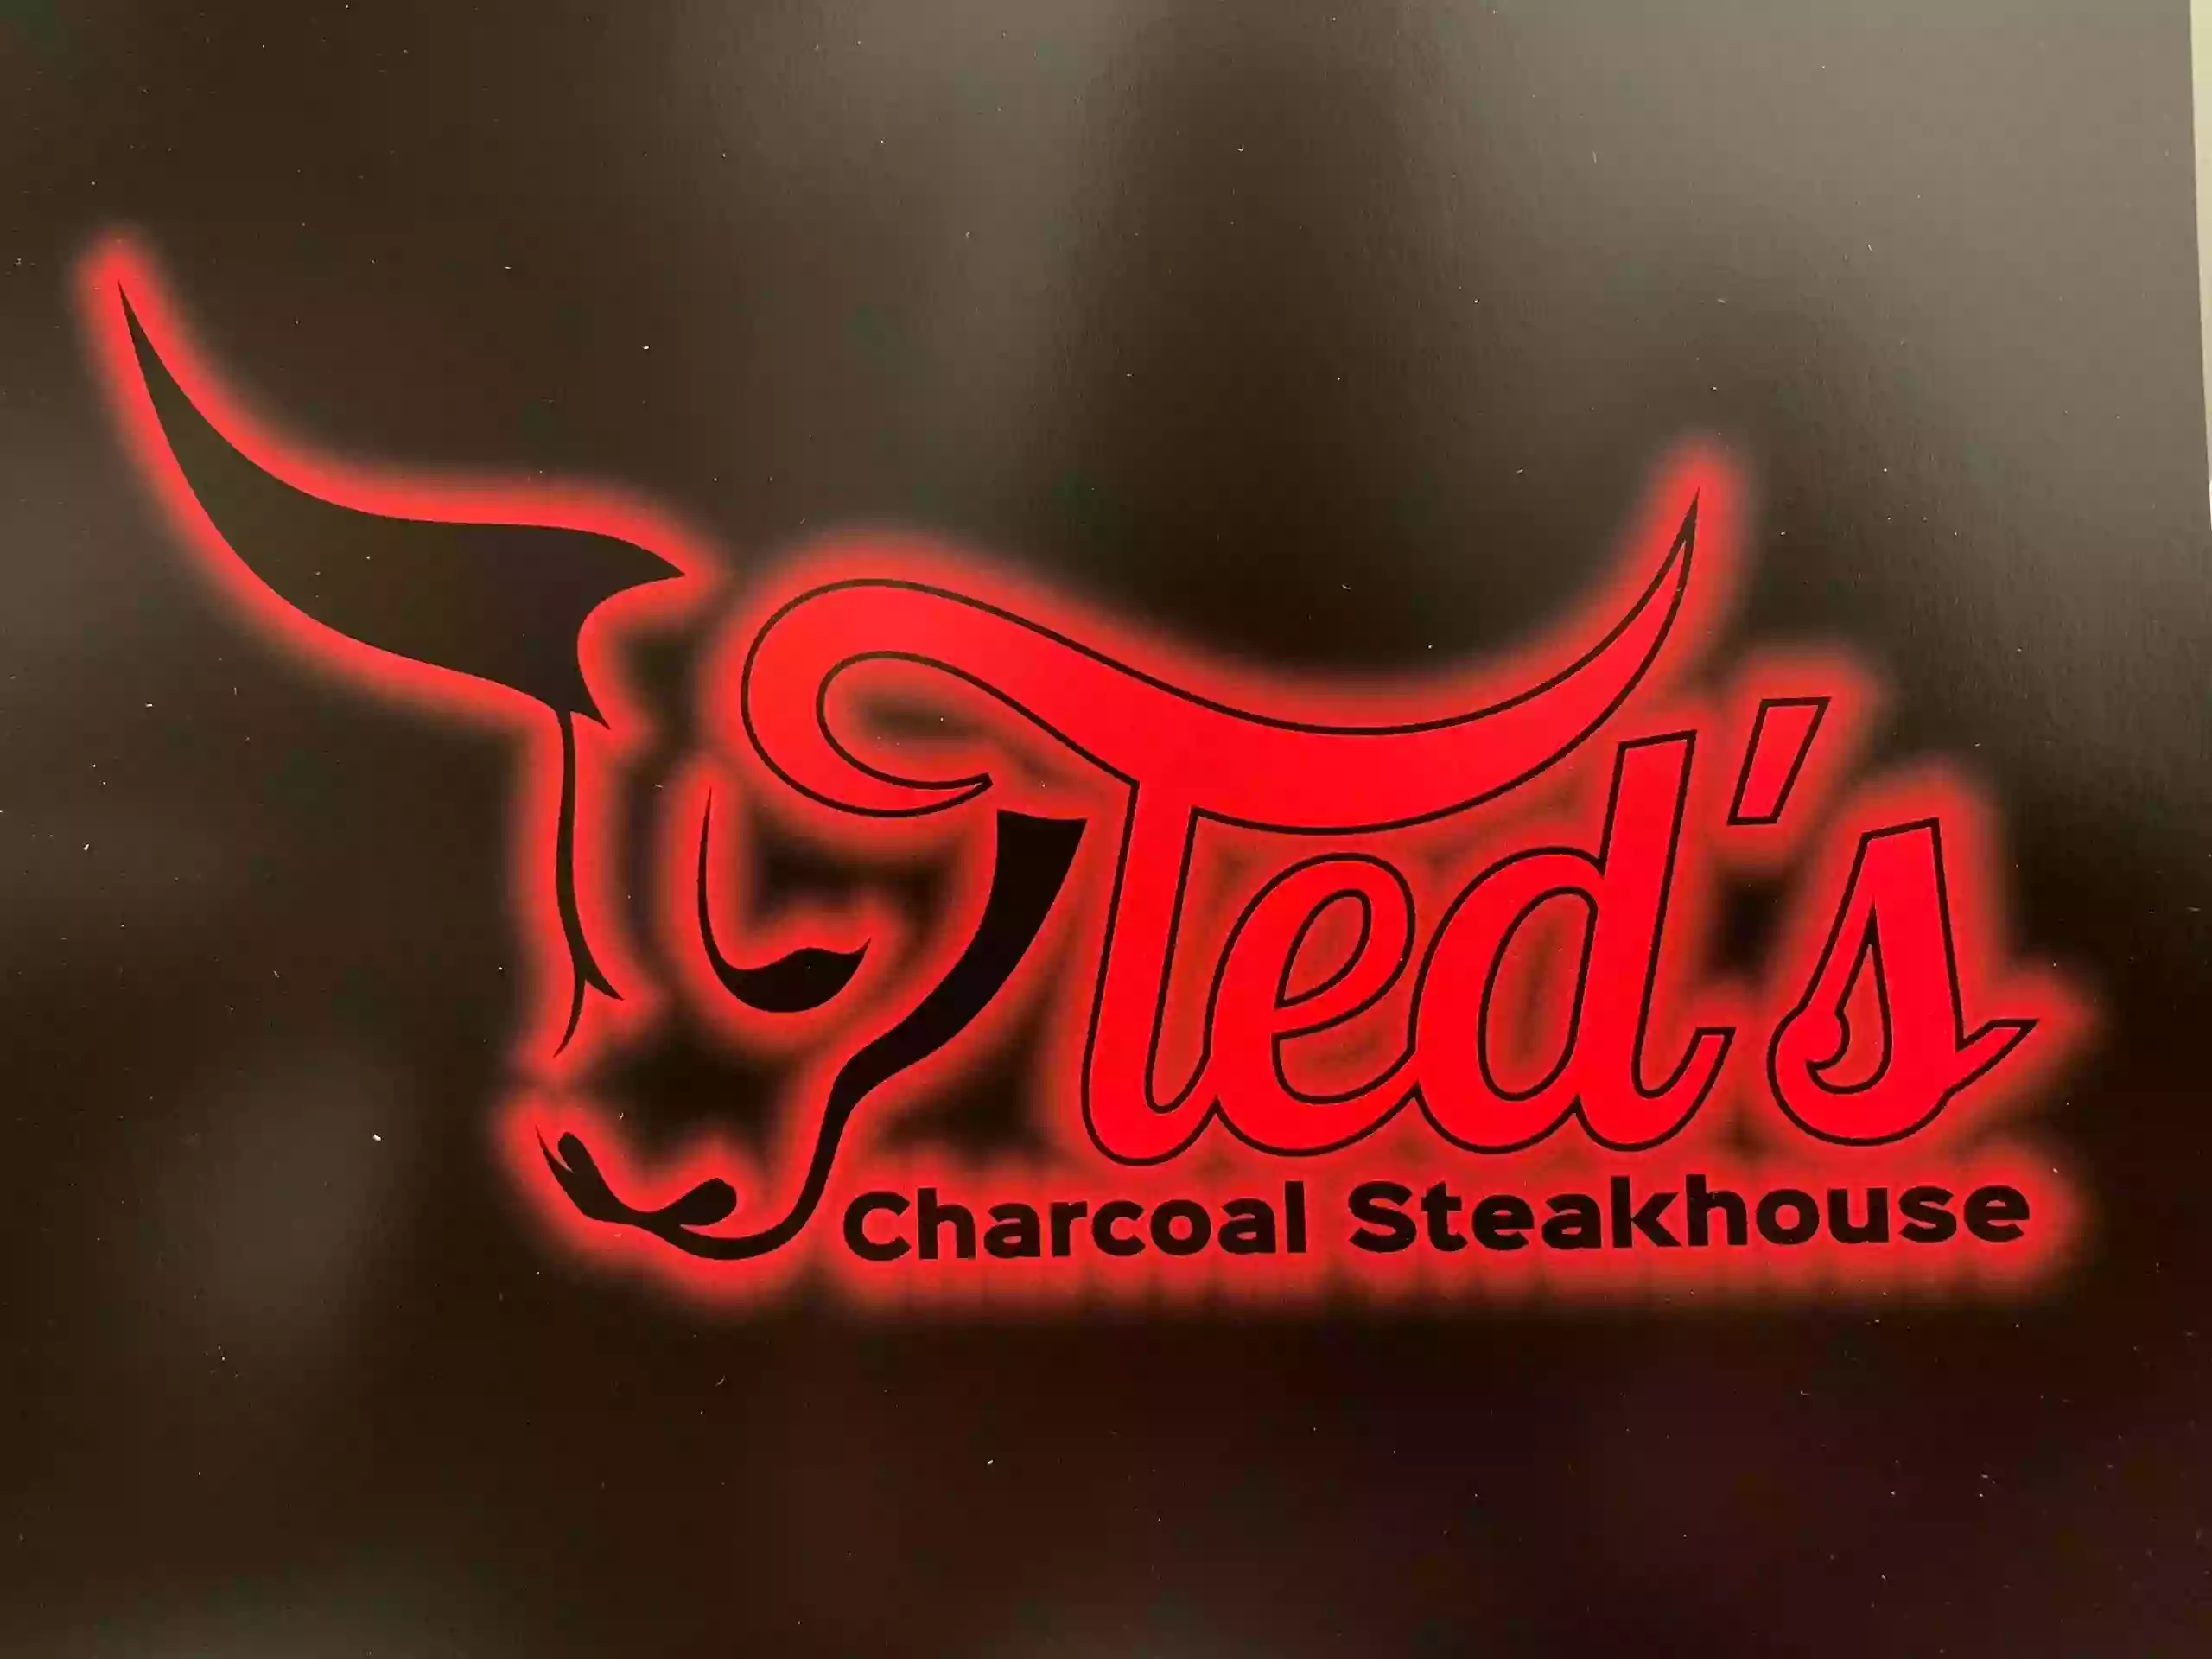 Ted's Charcoal Steakhouse